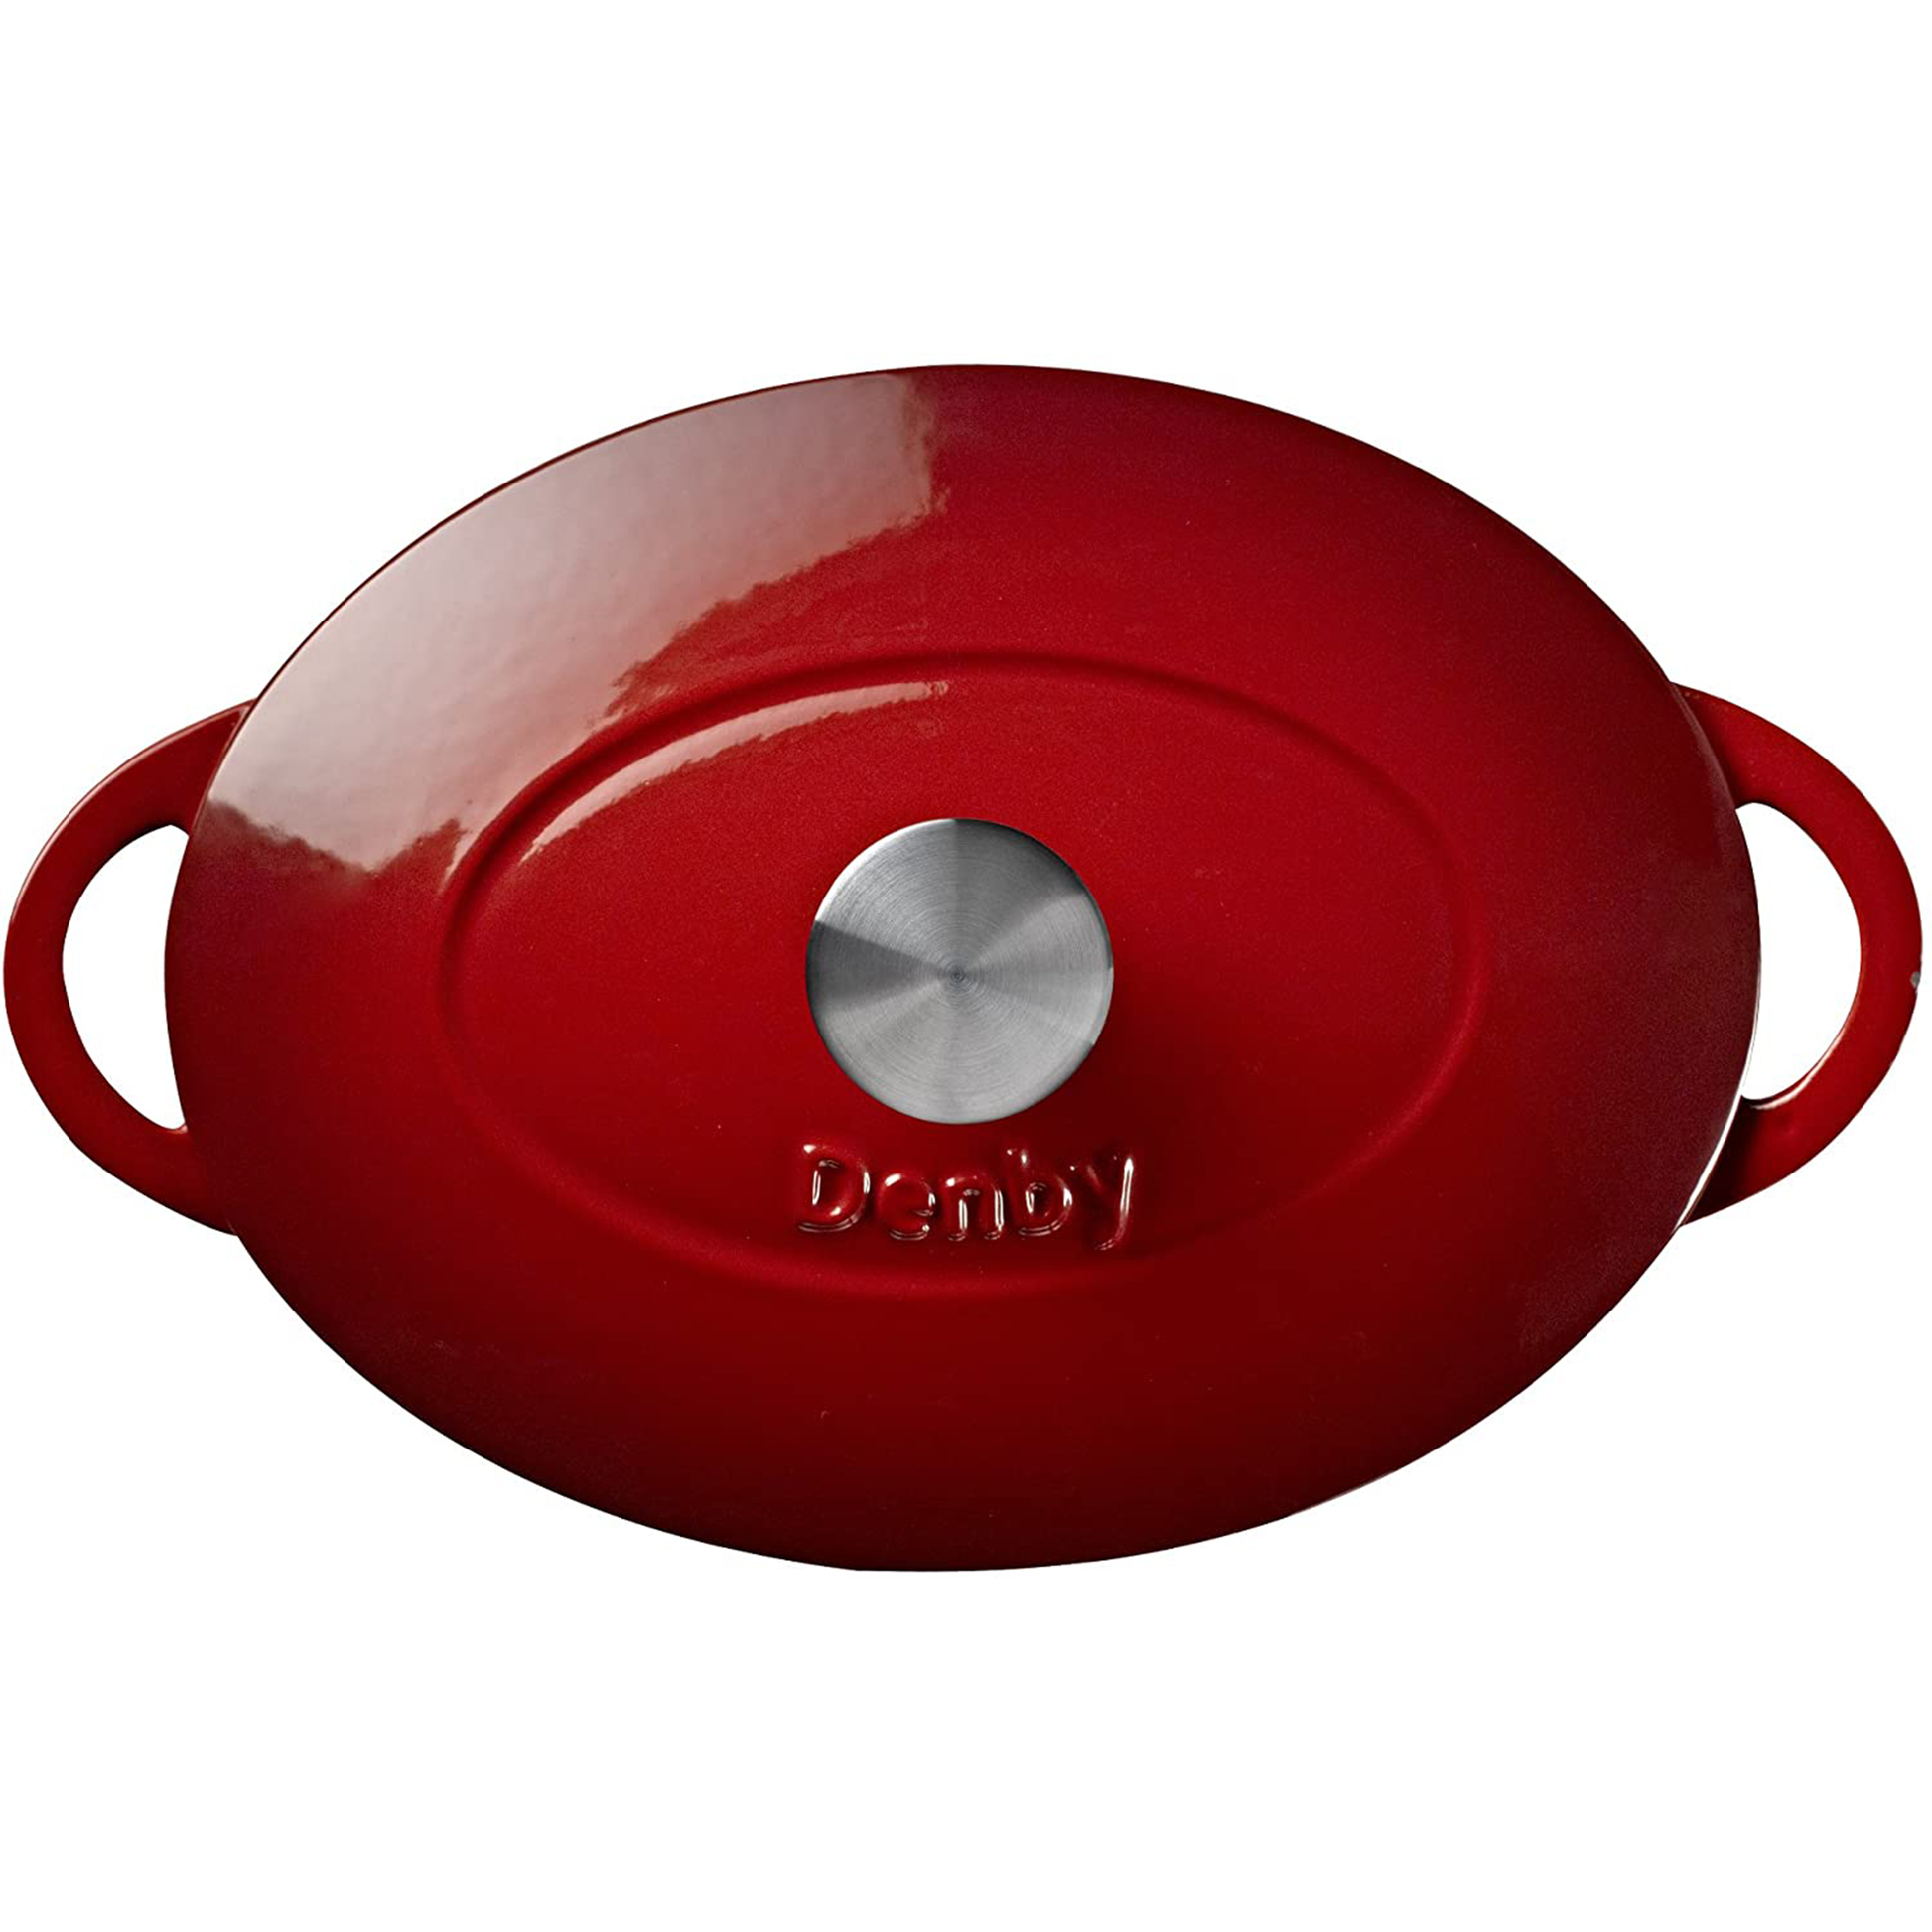 a photo of the red lid with it's stainless steel knob